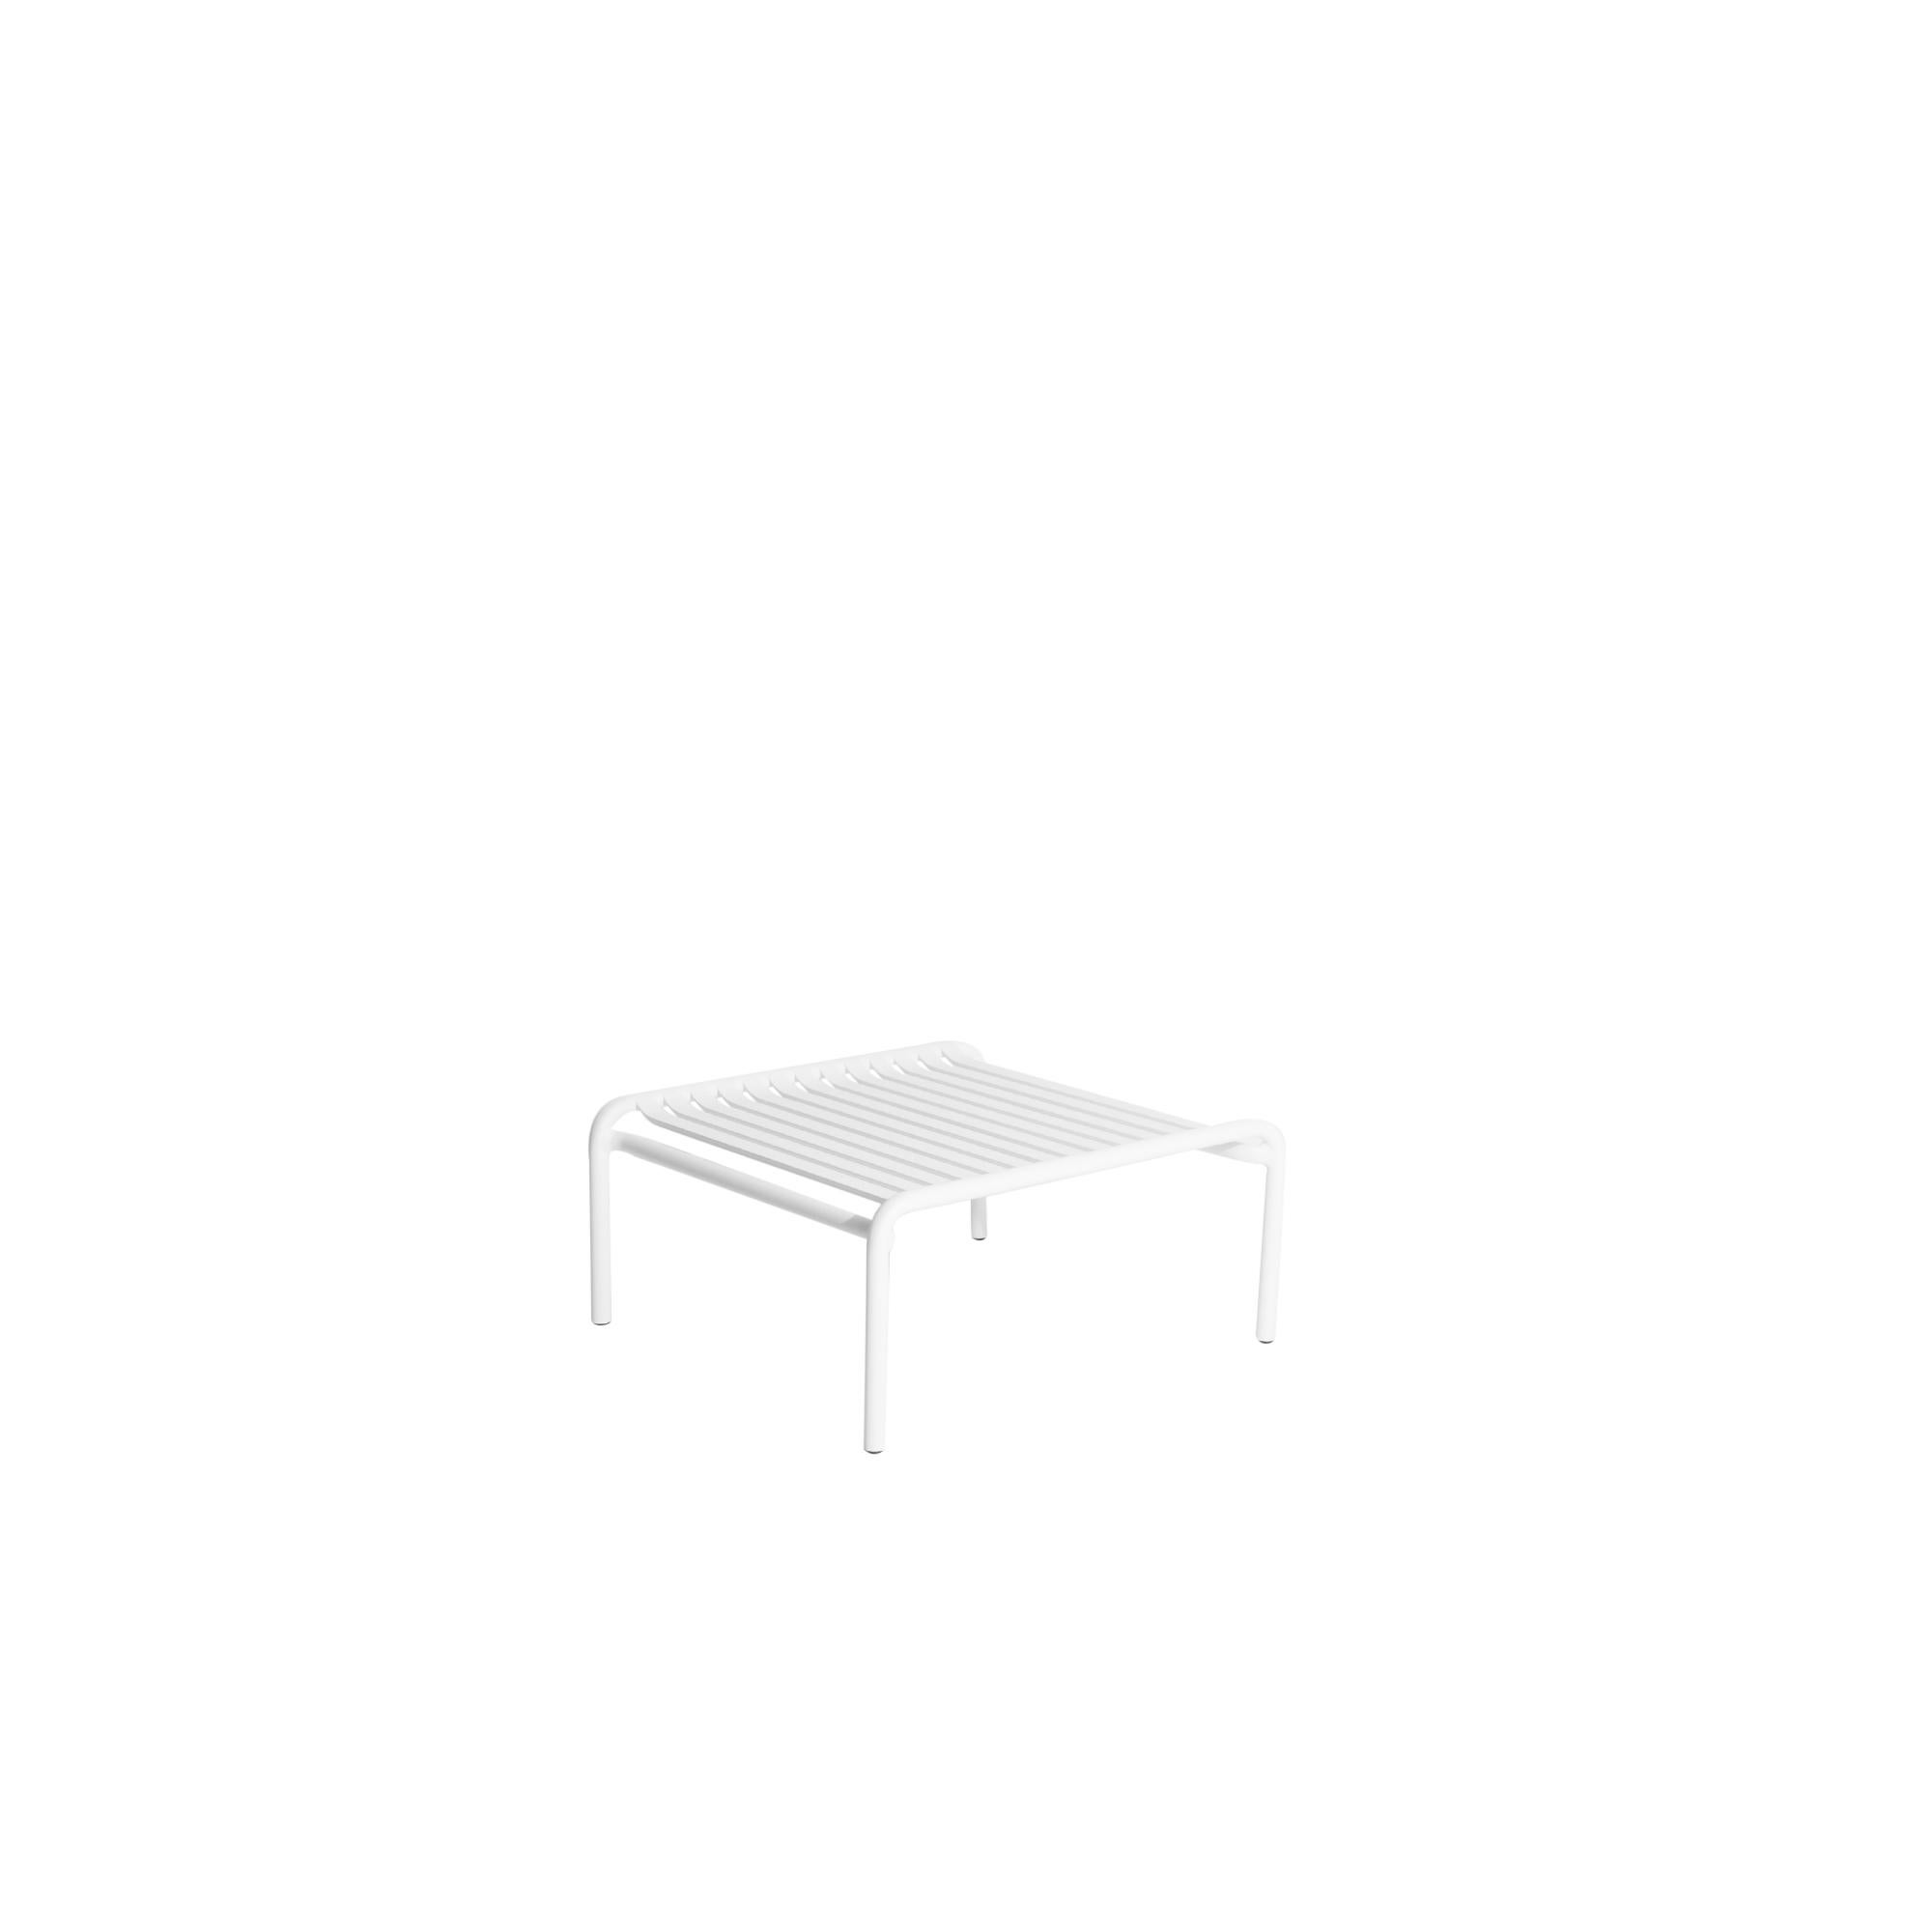 Petite Friture Week-End Coffee Table in White Aluminium by Studio BrichetZiegler, 2017

The week-end collection is a full range of outdoor furniture, in aluminium grained epoxy paint, matt finish, that includes 18 functions and 8 colours for the